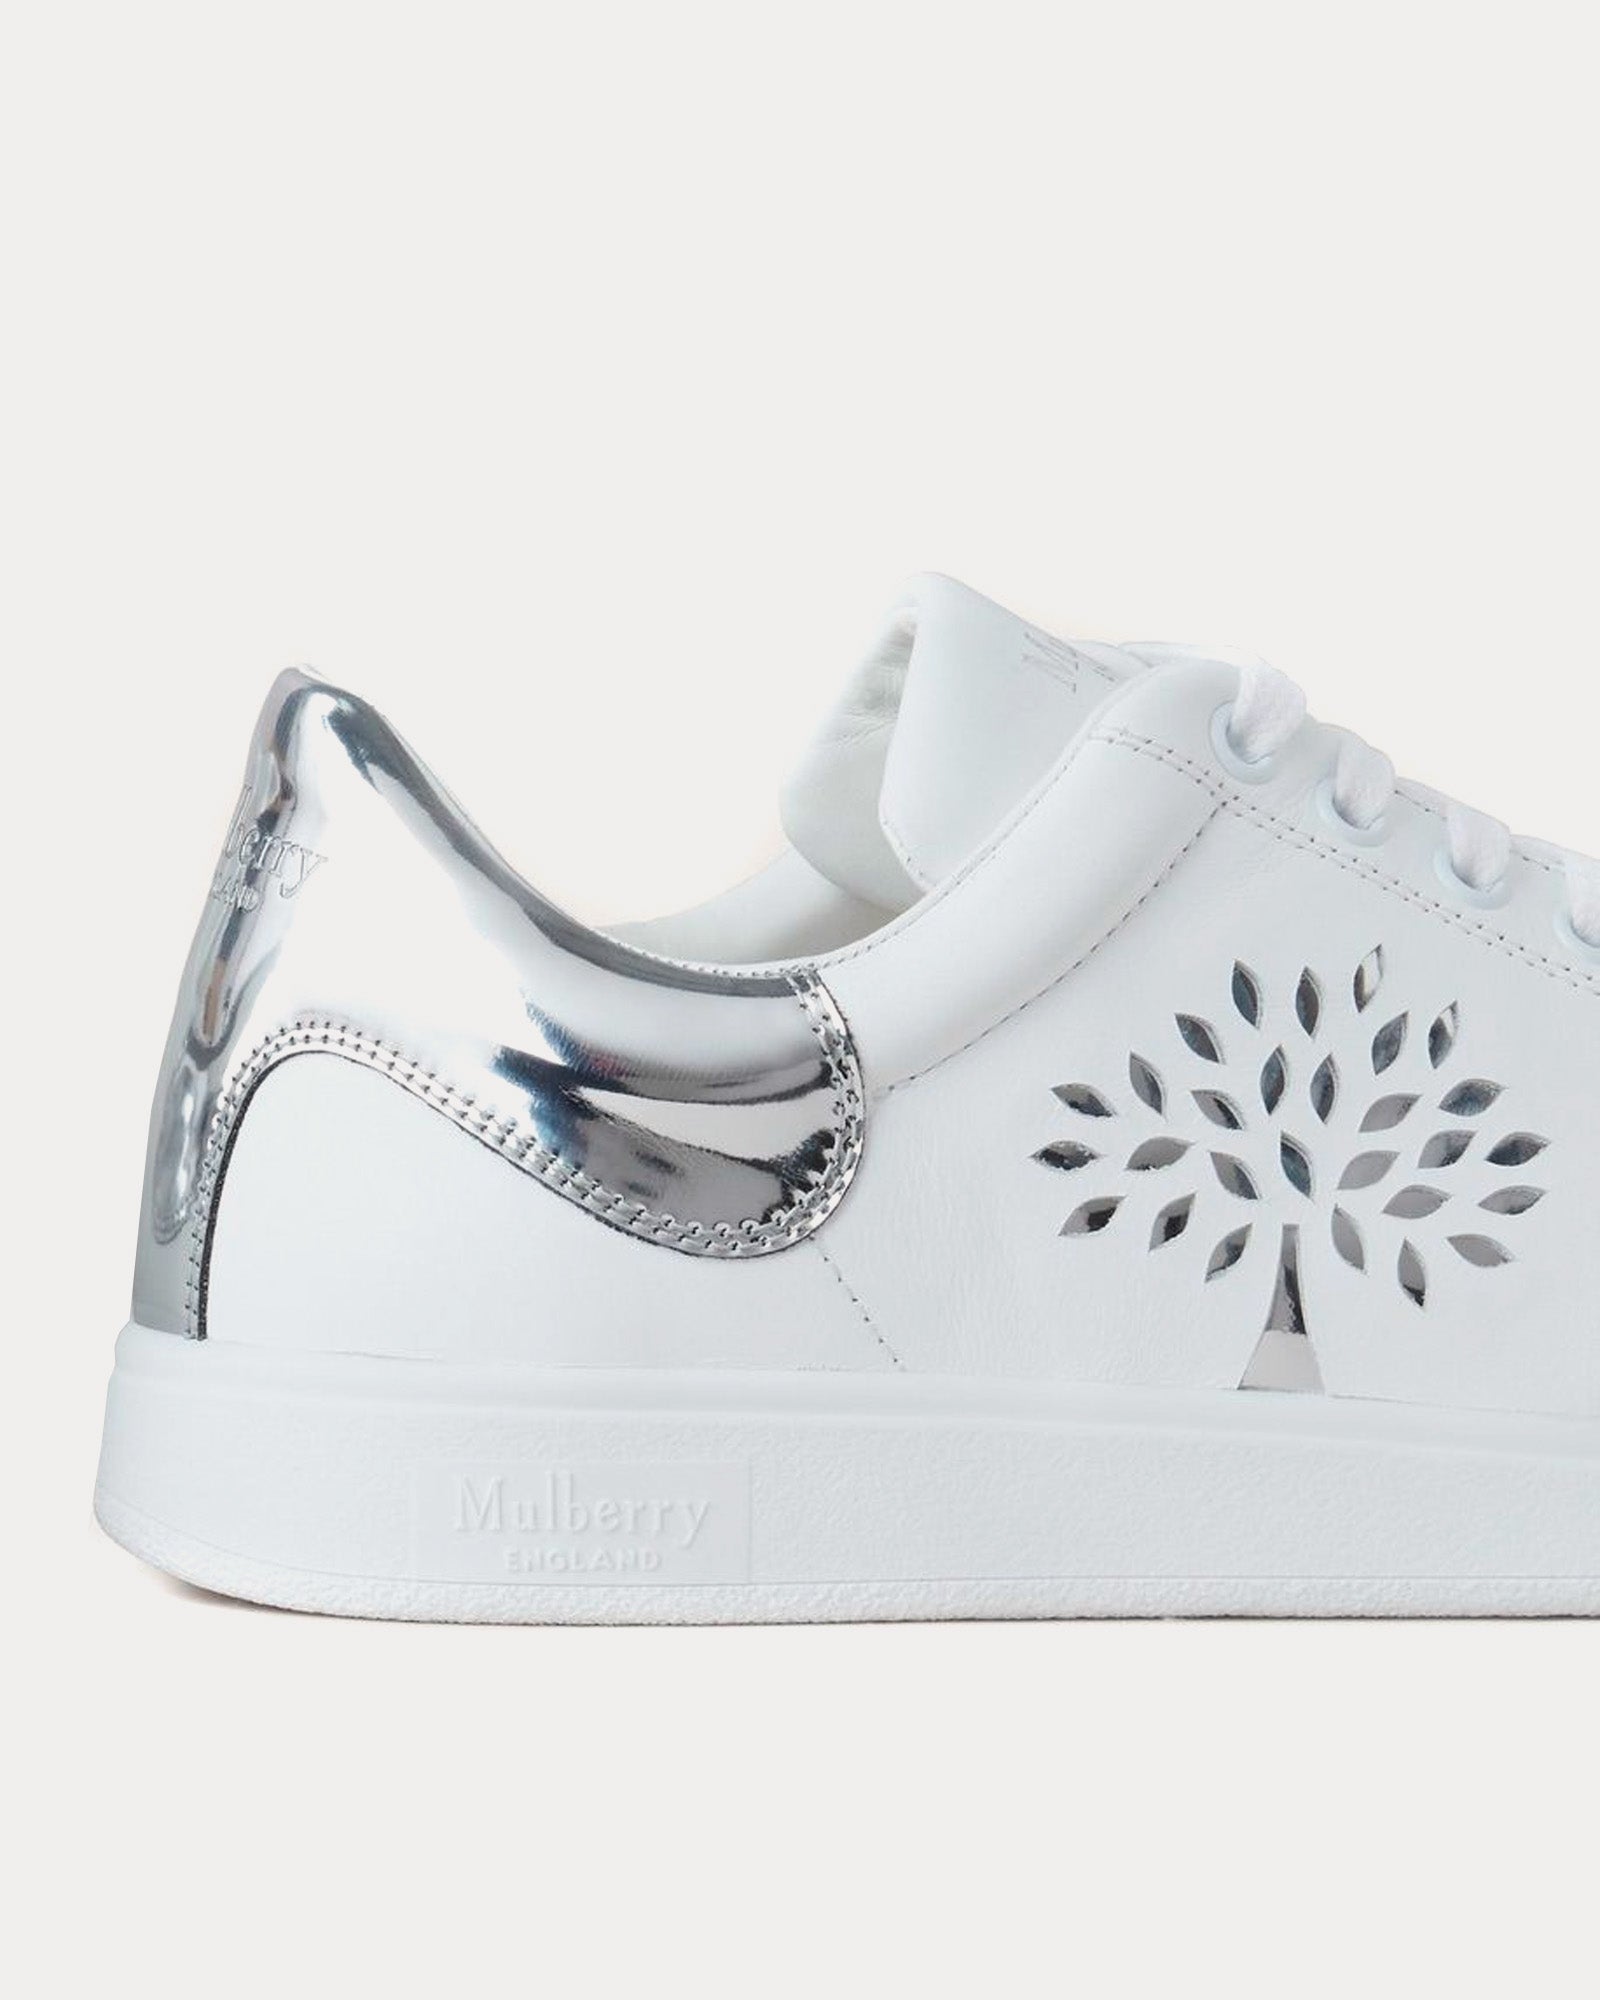 Mulberry - Tree Tennis Bovine Leather White / Silver Low Top Sneakers